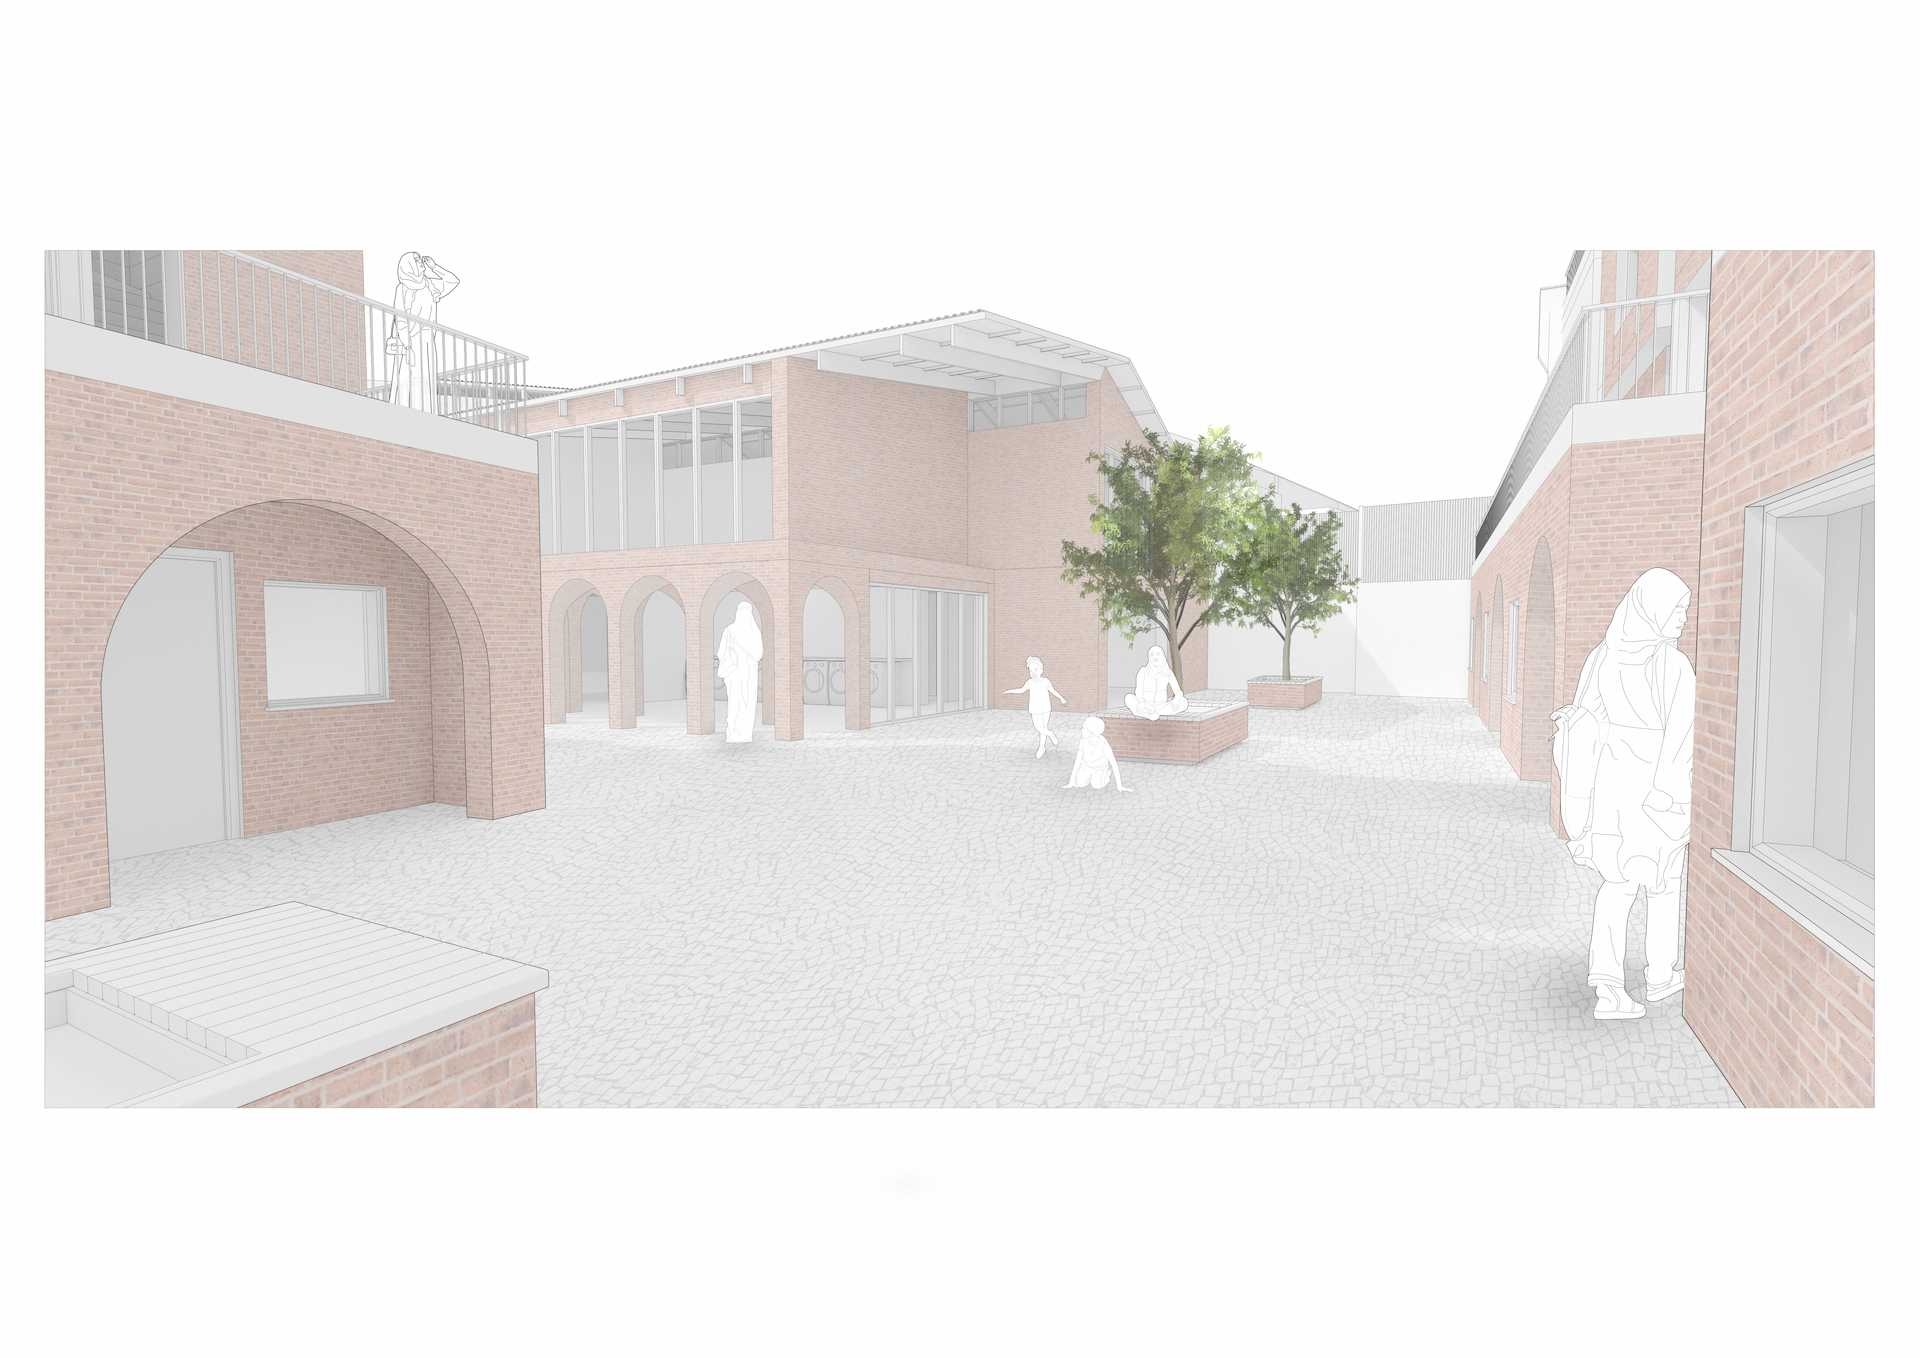 Central Courtyard Visualisation